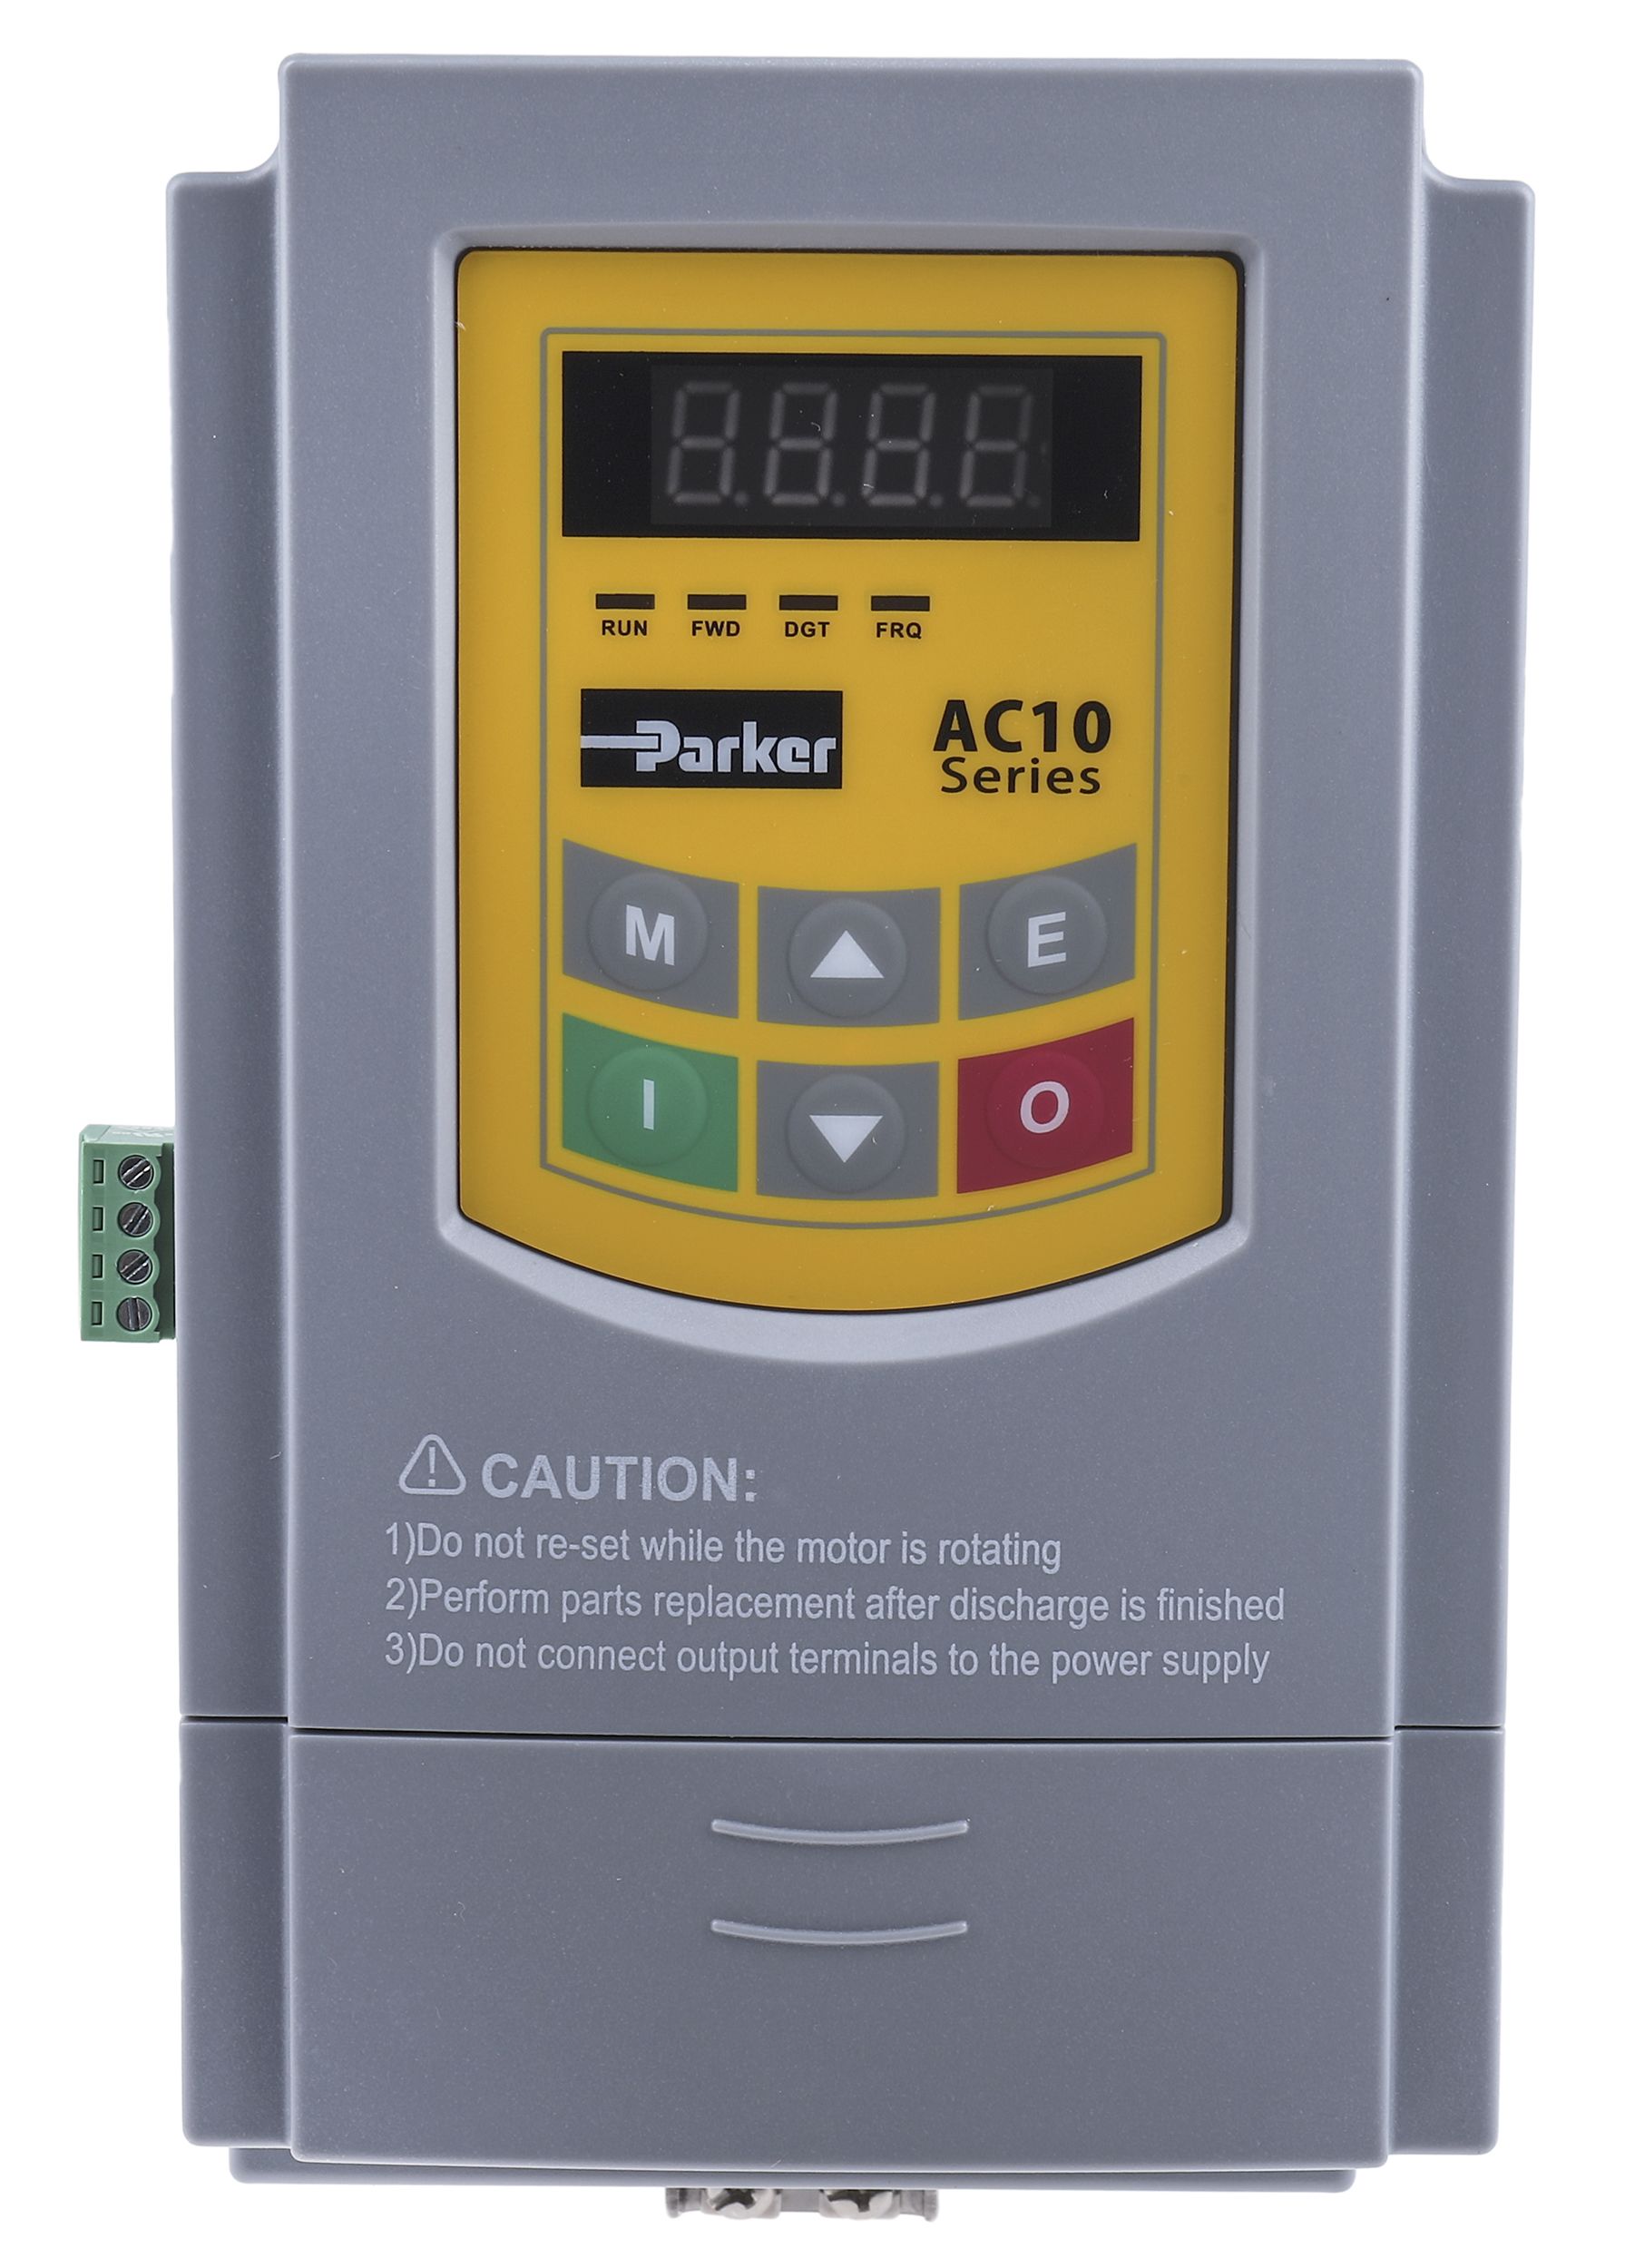 Parker AC10 Inverter Drive, 3-Phase In, 0.5 → 590Hz Out, 2.2 kW, 400 V ac, 9.6 A